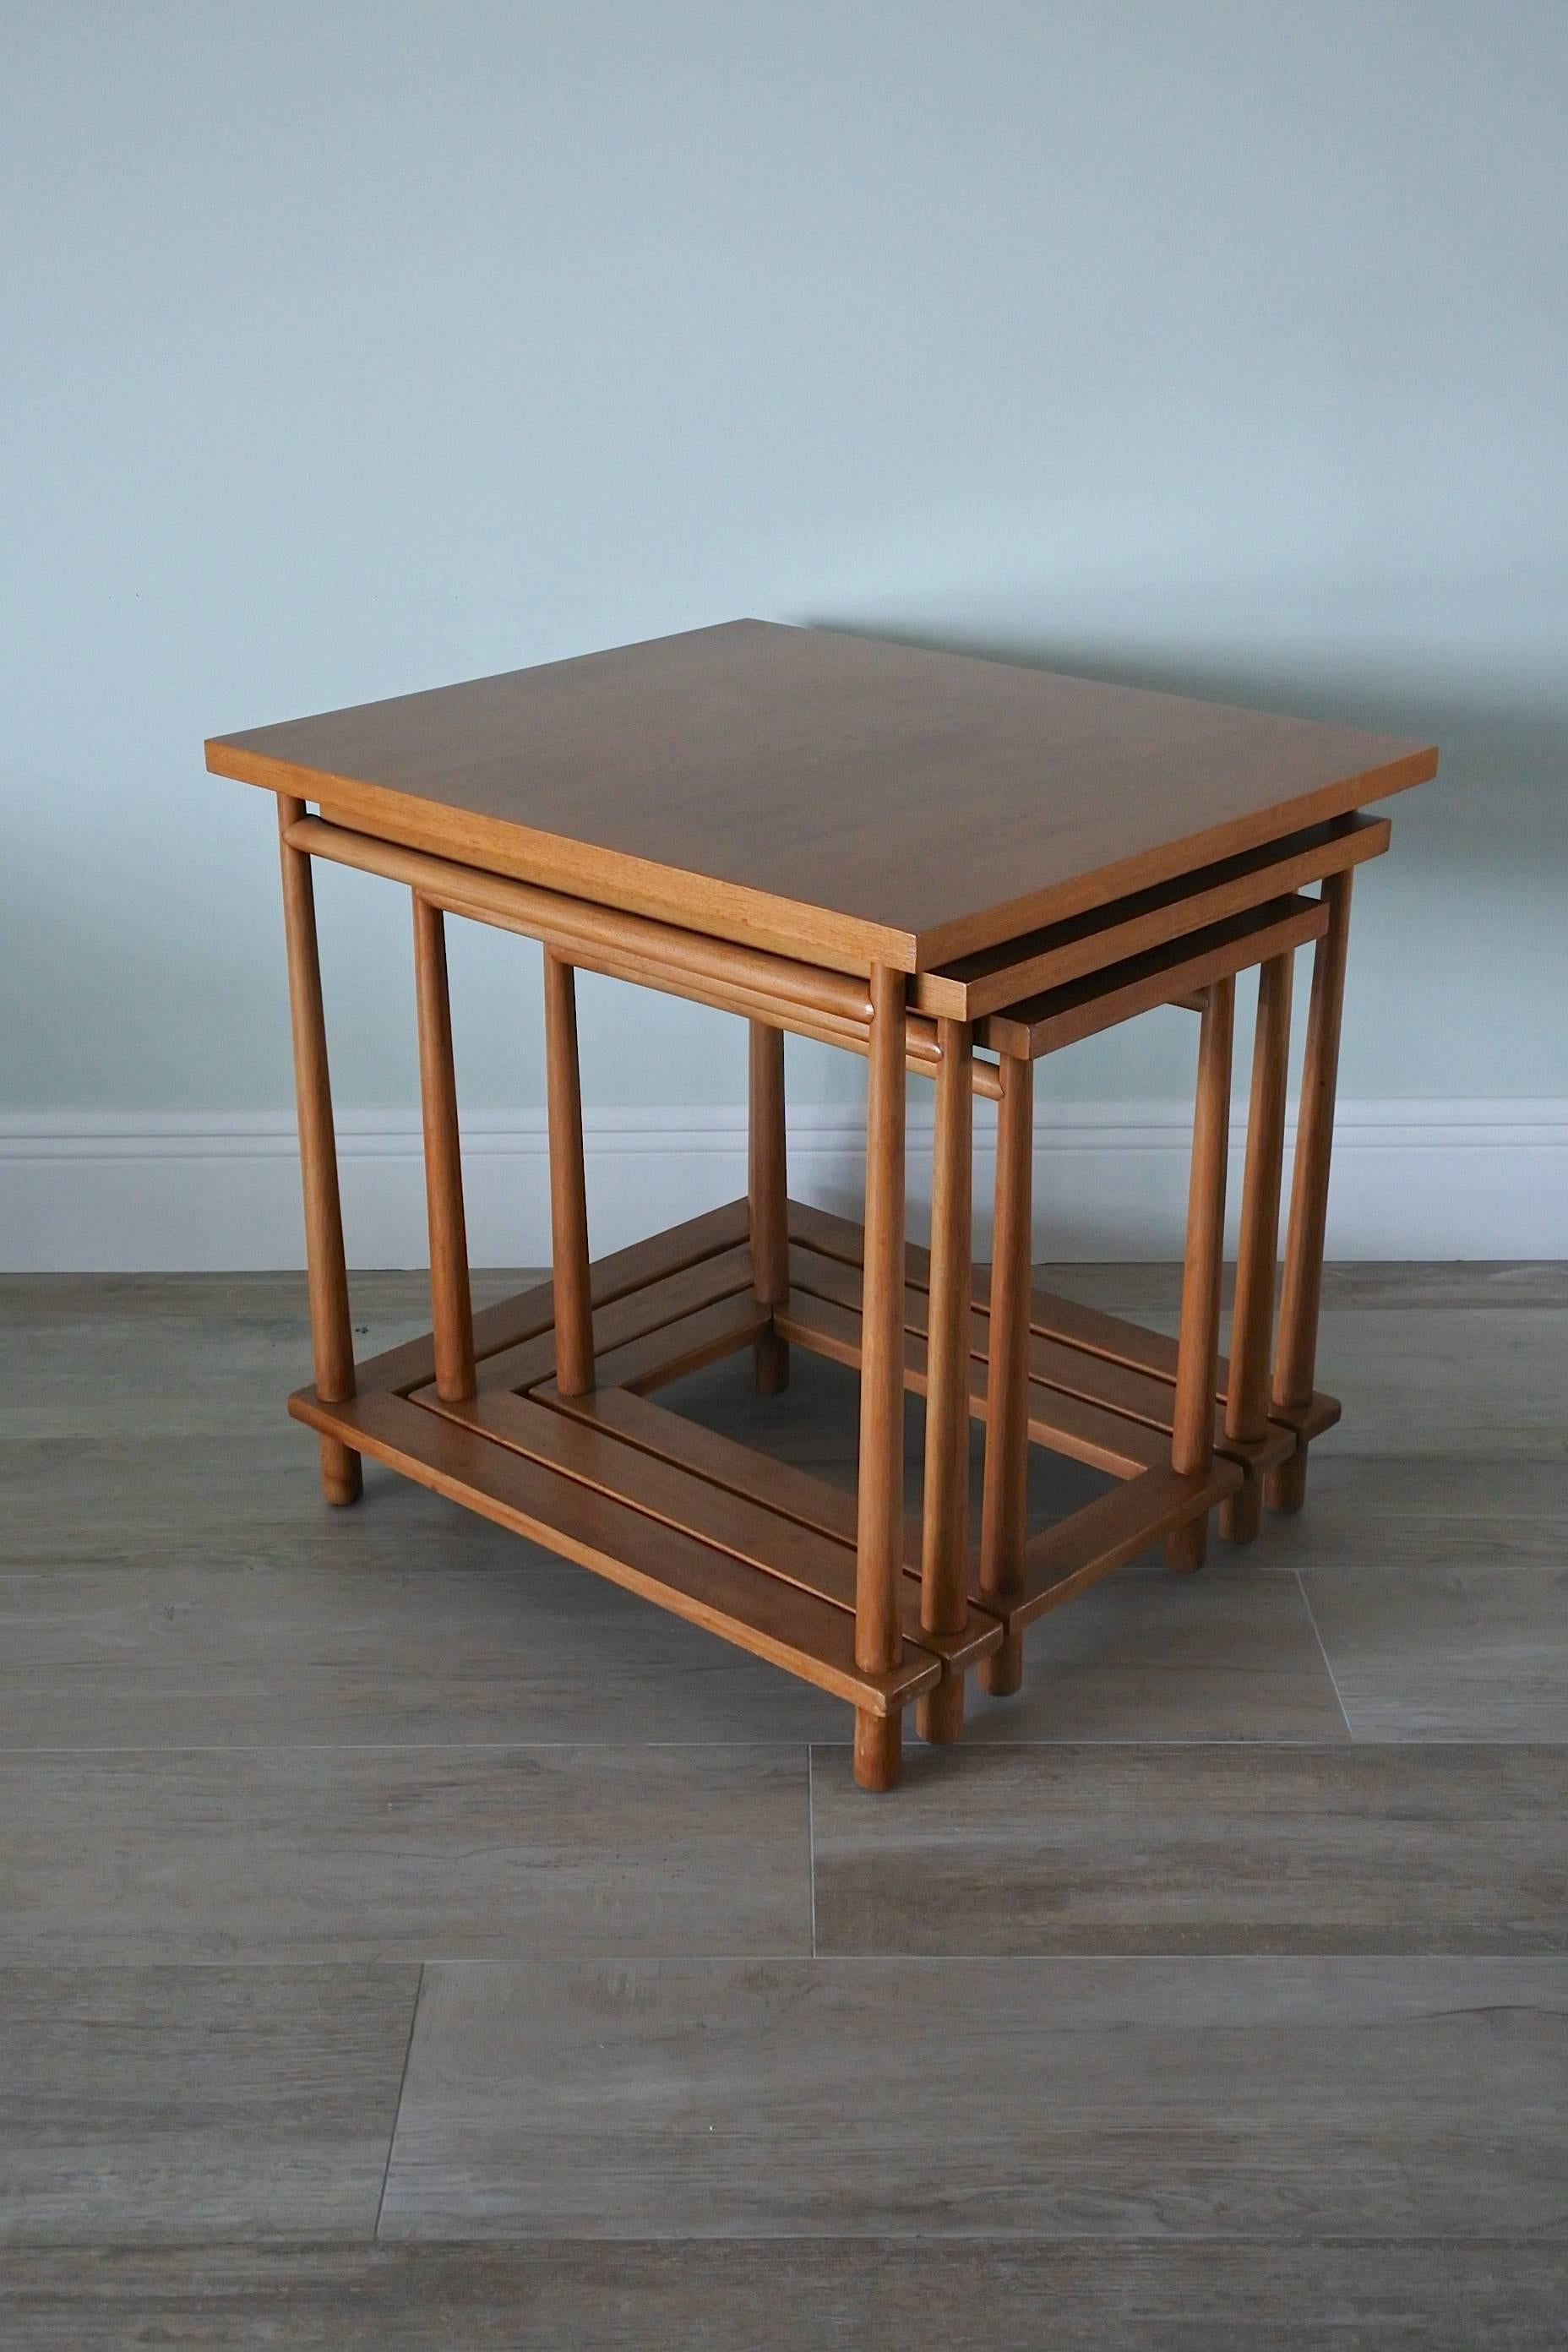 Set of three nesting tables by T.H. Robsjohn-Gibbings.
Manufactured in the United States in the 1950s by Widdicomb.
Solid and veneered wood.
Label underneath the smaller table.
       